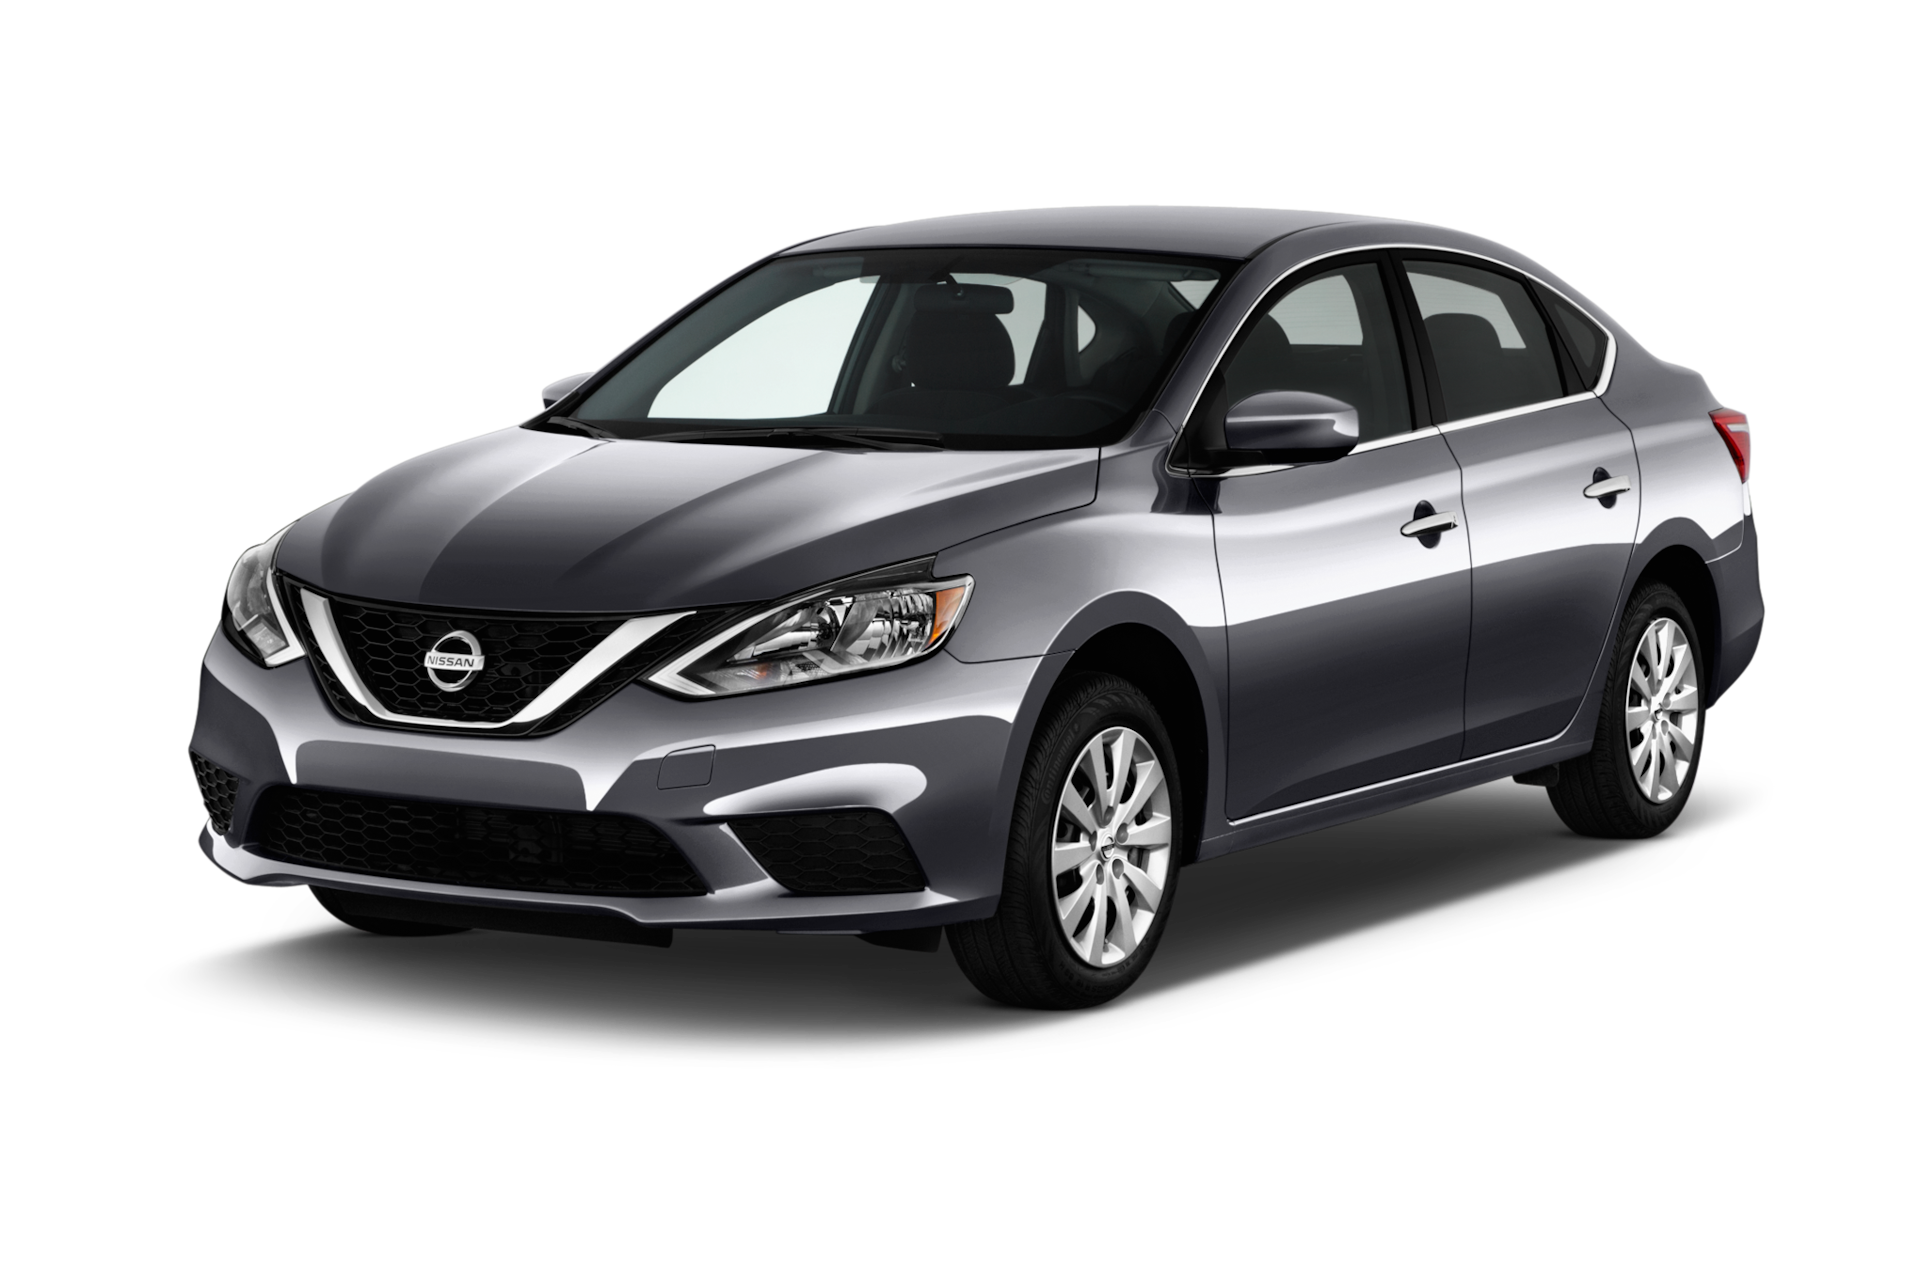 2019 Nissan Sentra Prices, Reviews, and Photos - MotorTrend